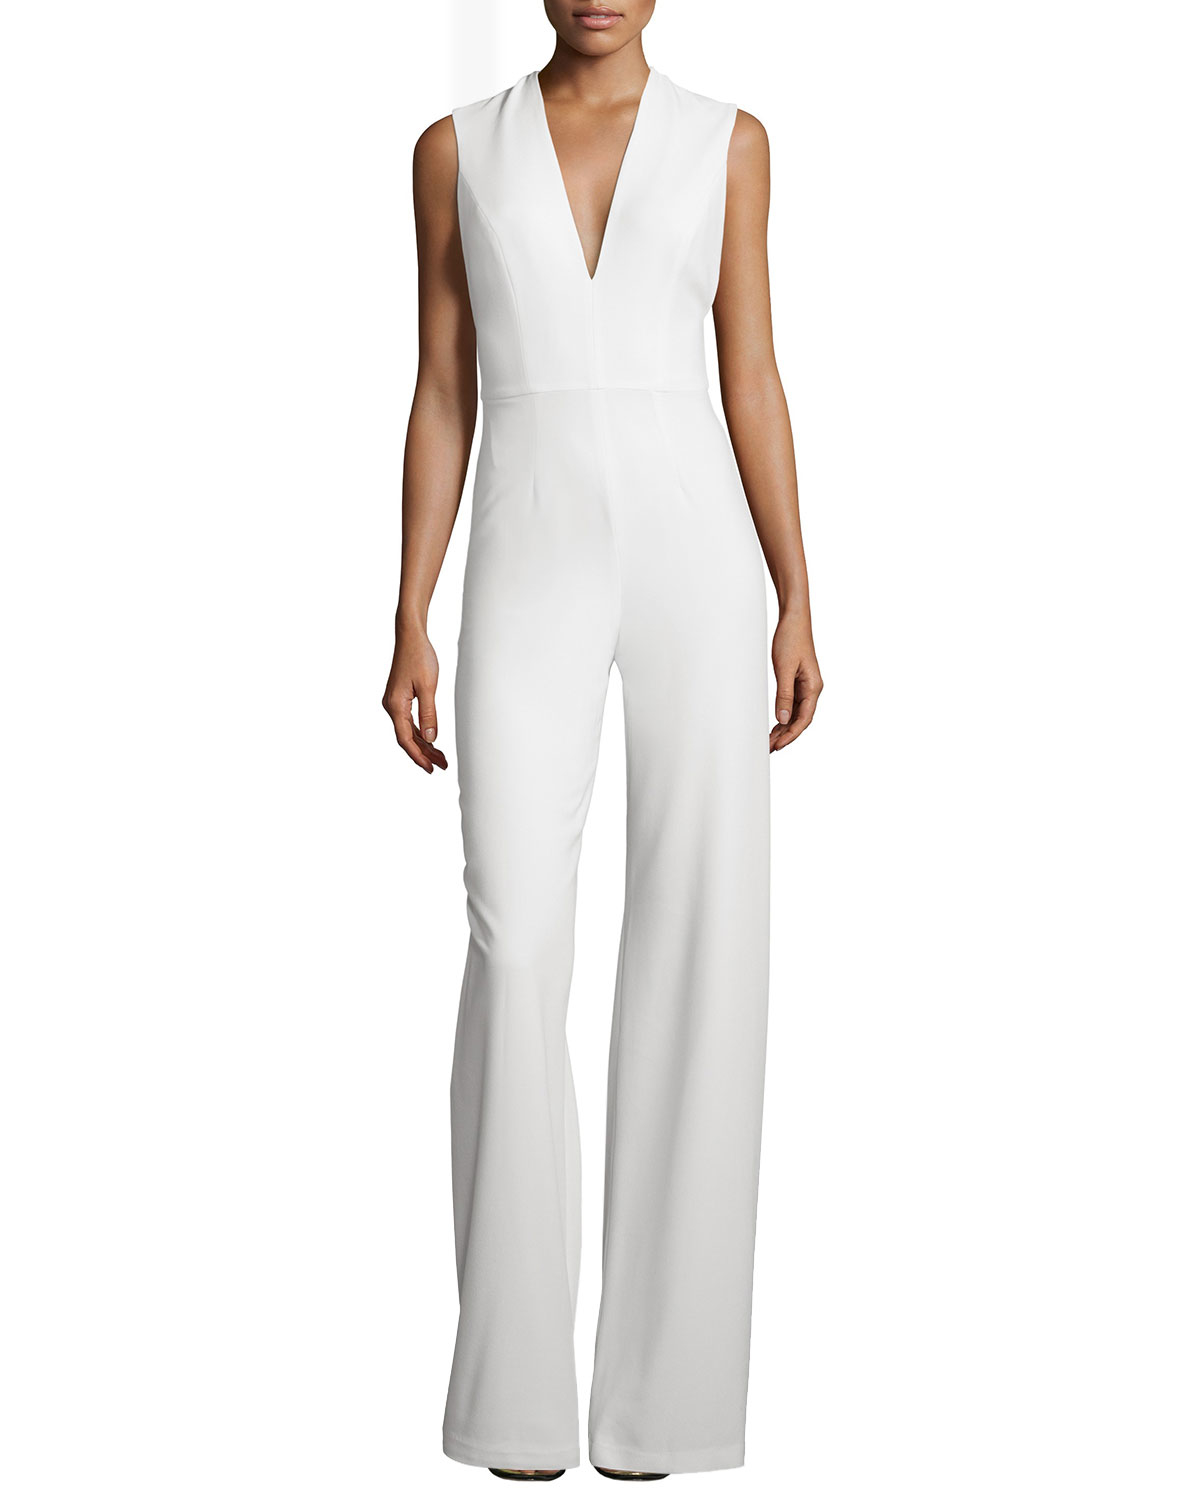 Lyst - Alexis Amadeo Sleeveless V-neck Jumpsuit With Cape in White